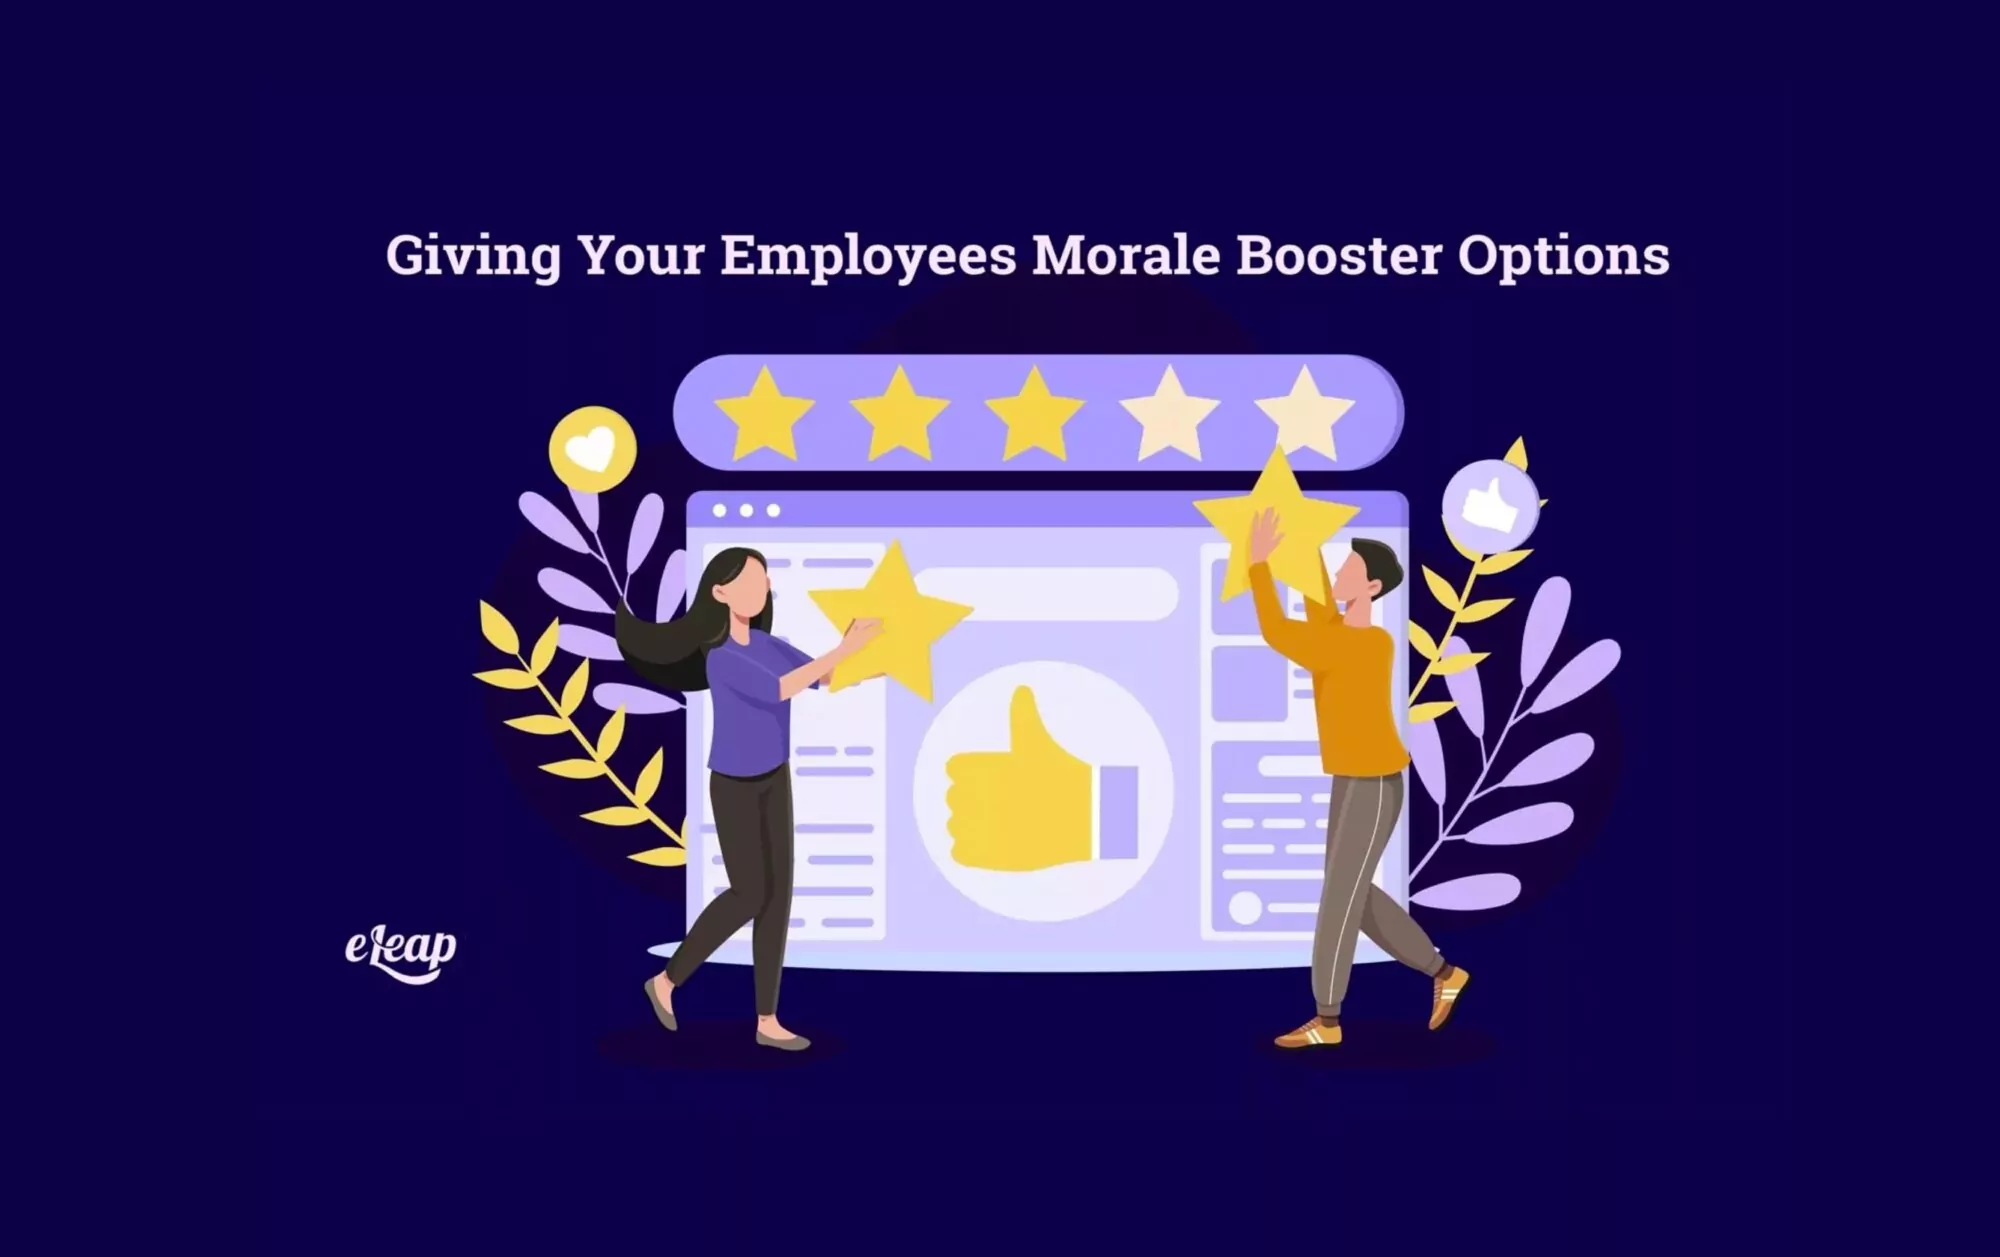 Giving Your Employees Morale Booster Options